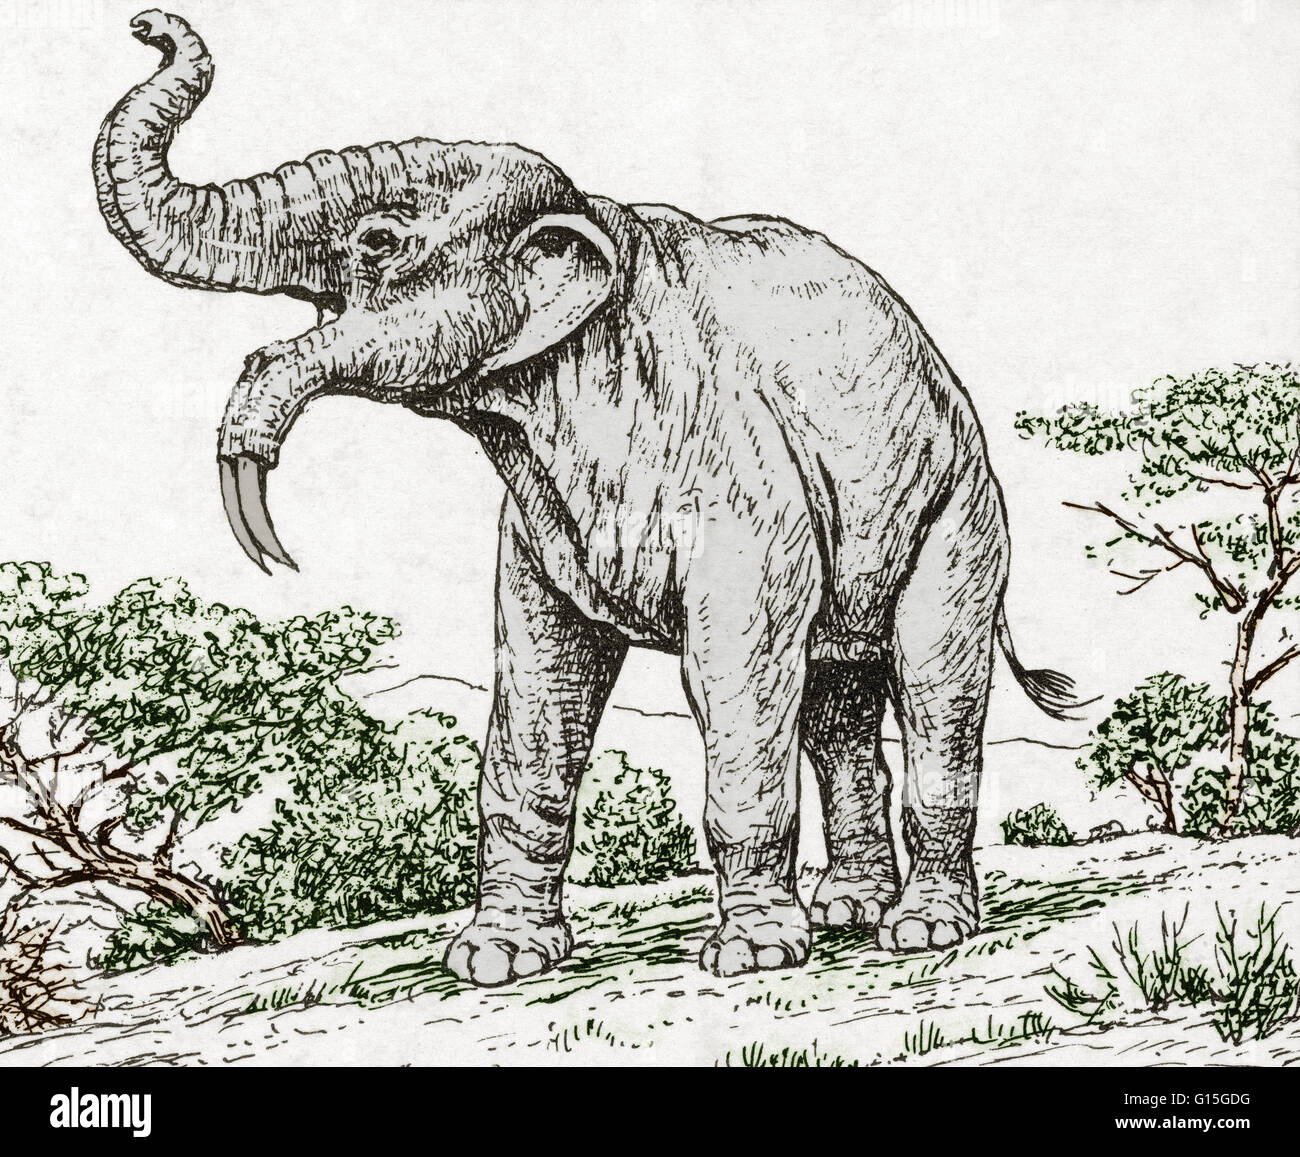 Illustration of a Deinotherium, a prehistoric relative of modern-day elephants. It is also called the Hoe tusker and known as the third largest land mammal that has existed. Stock Photo